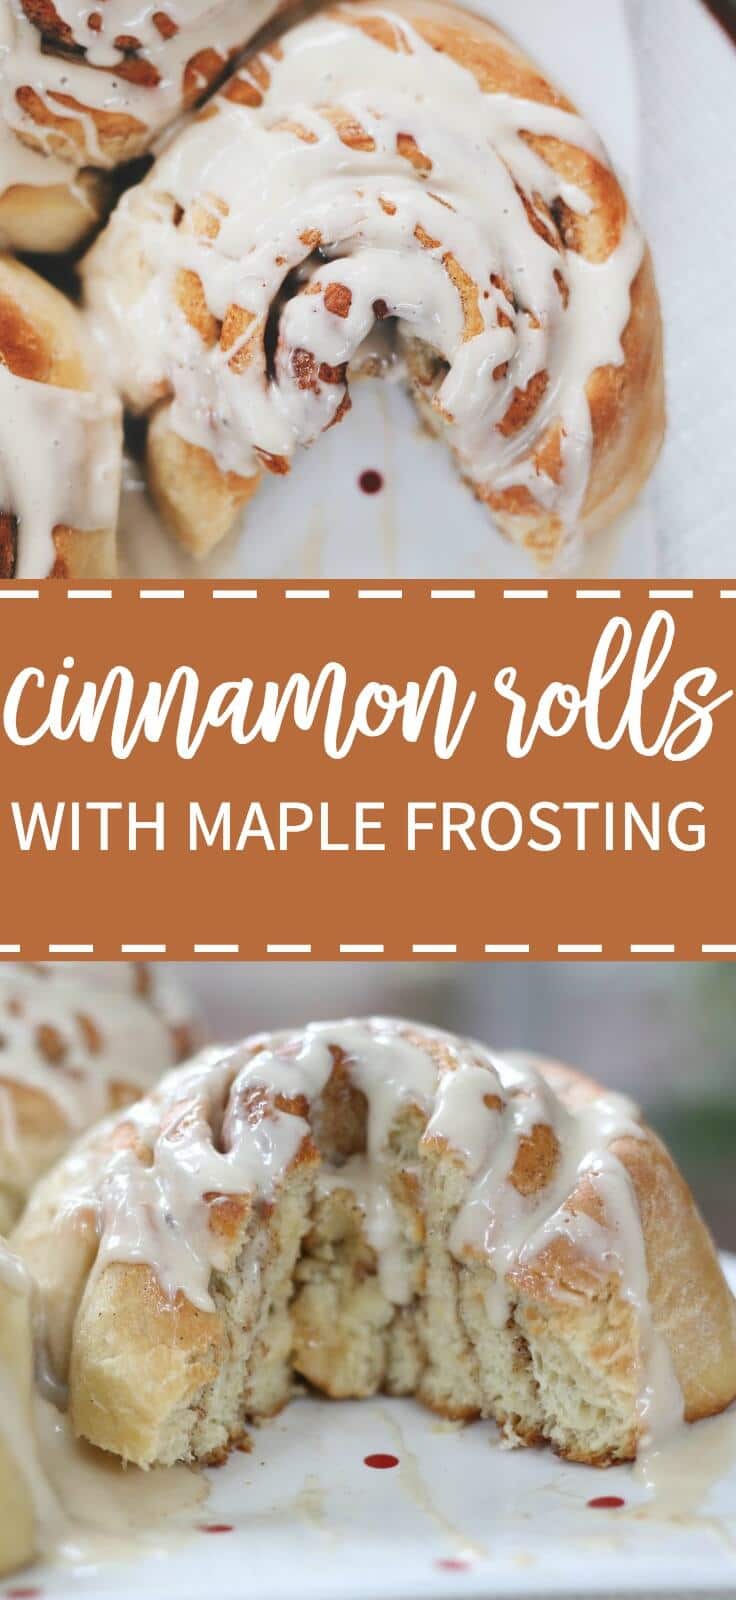 giant cinnamon rolls with maple frosting! These will be the star of your next brunch spread.